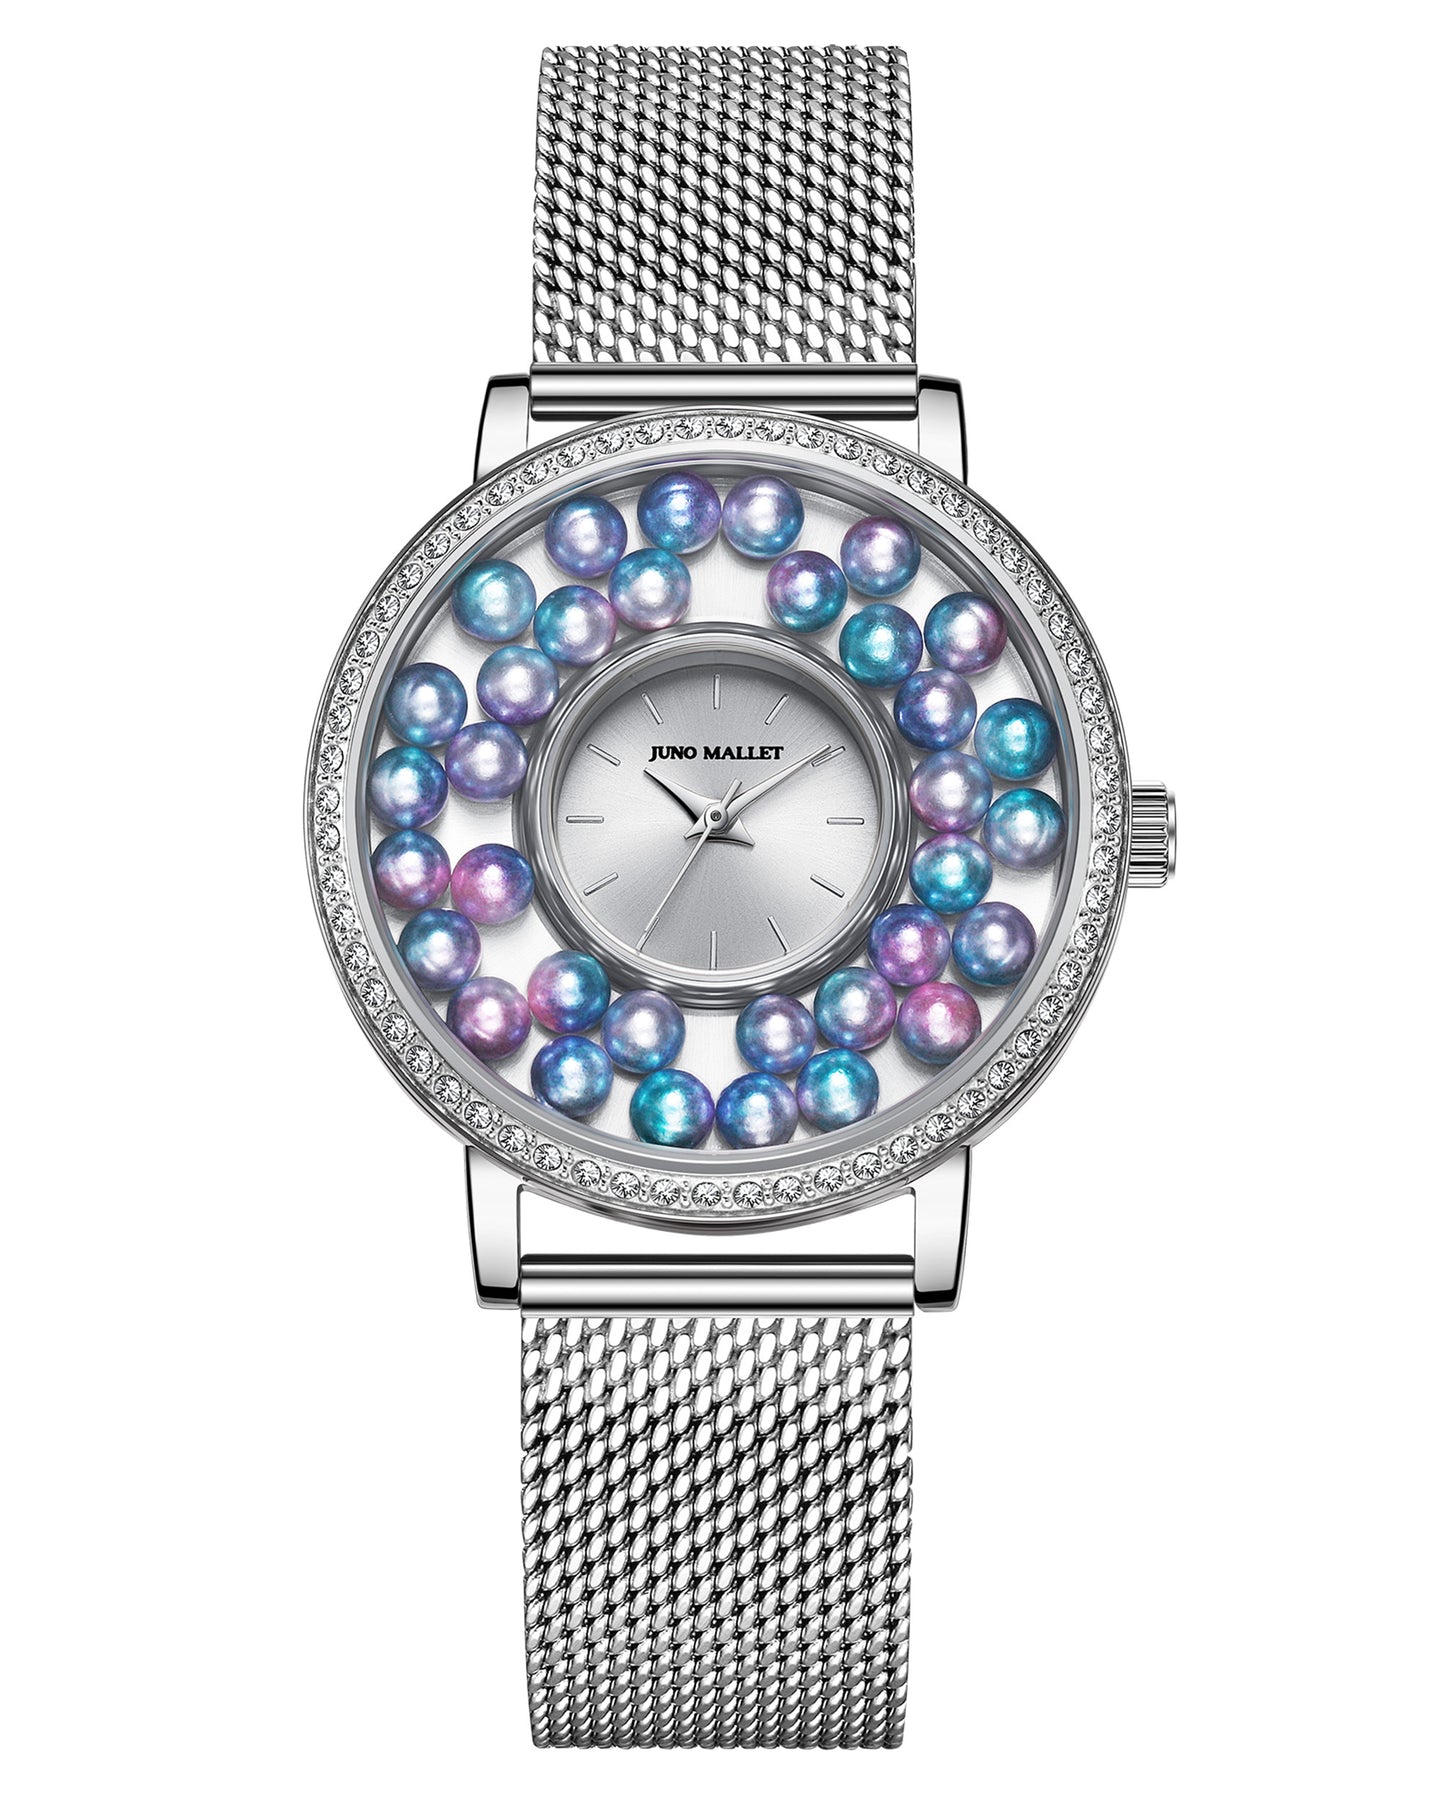 Crystal Lively Locket Watch | Silver Minimalist Watch with DIY Charms | Floating Pearls